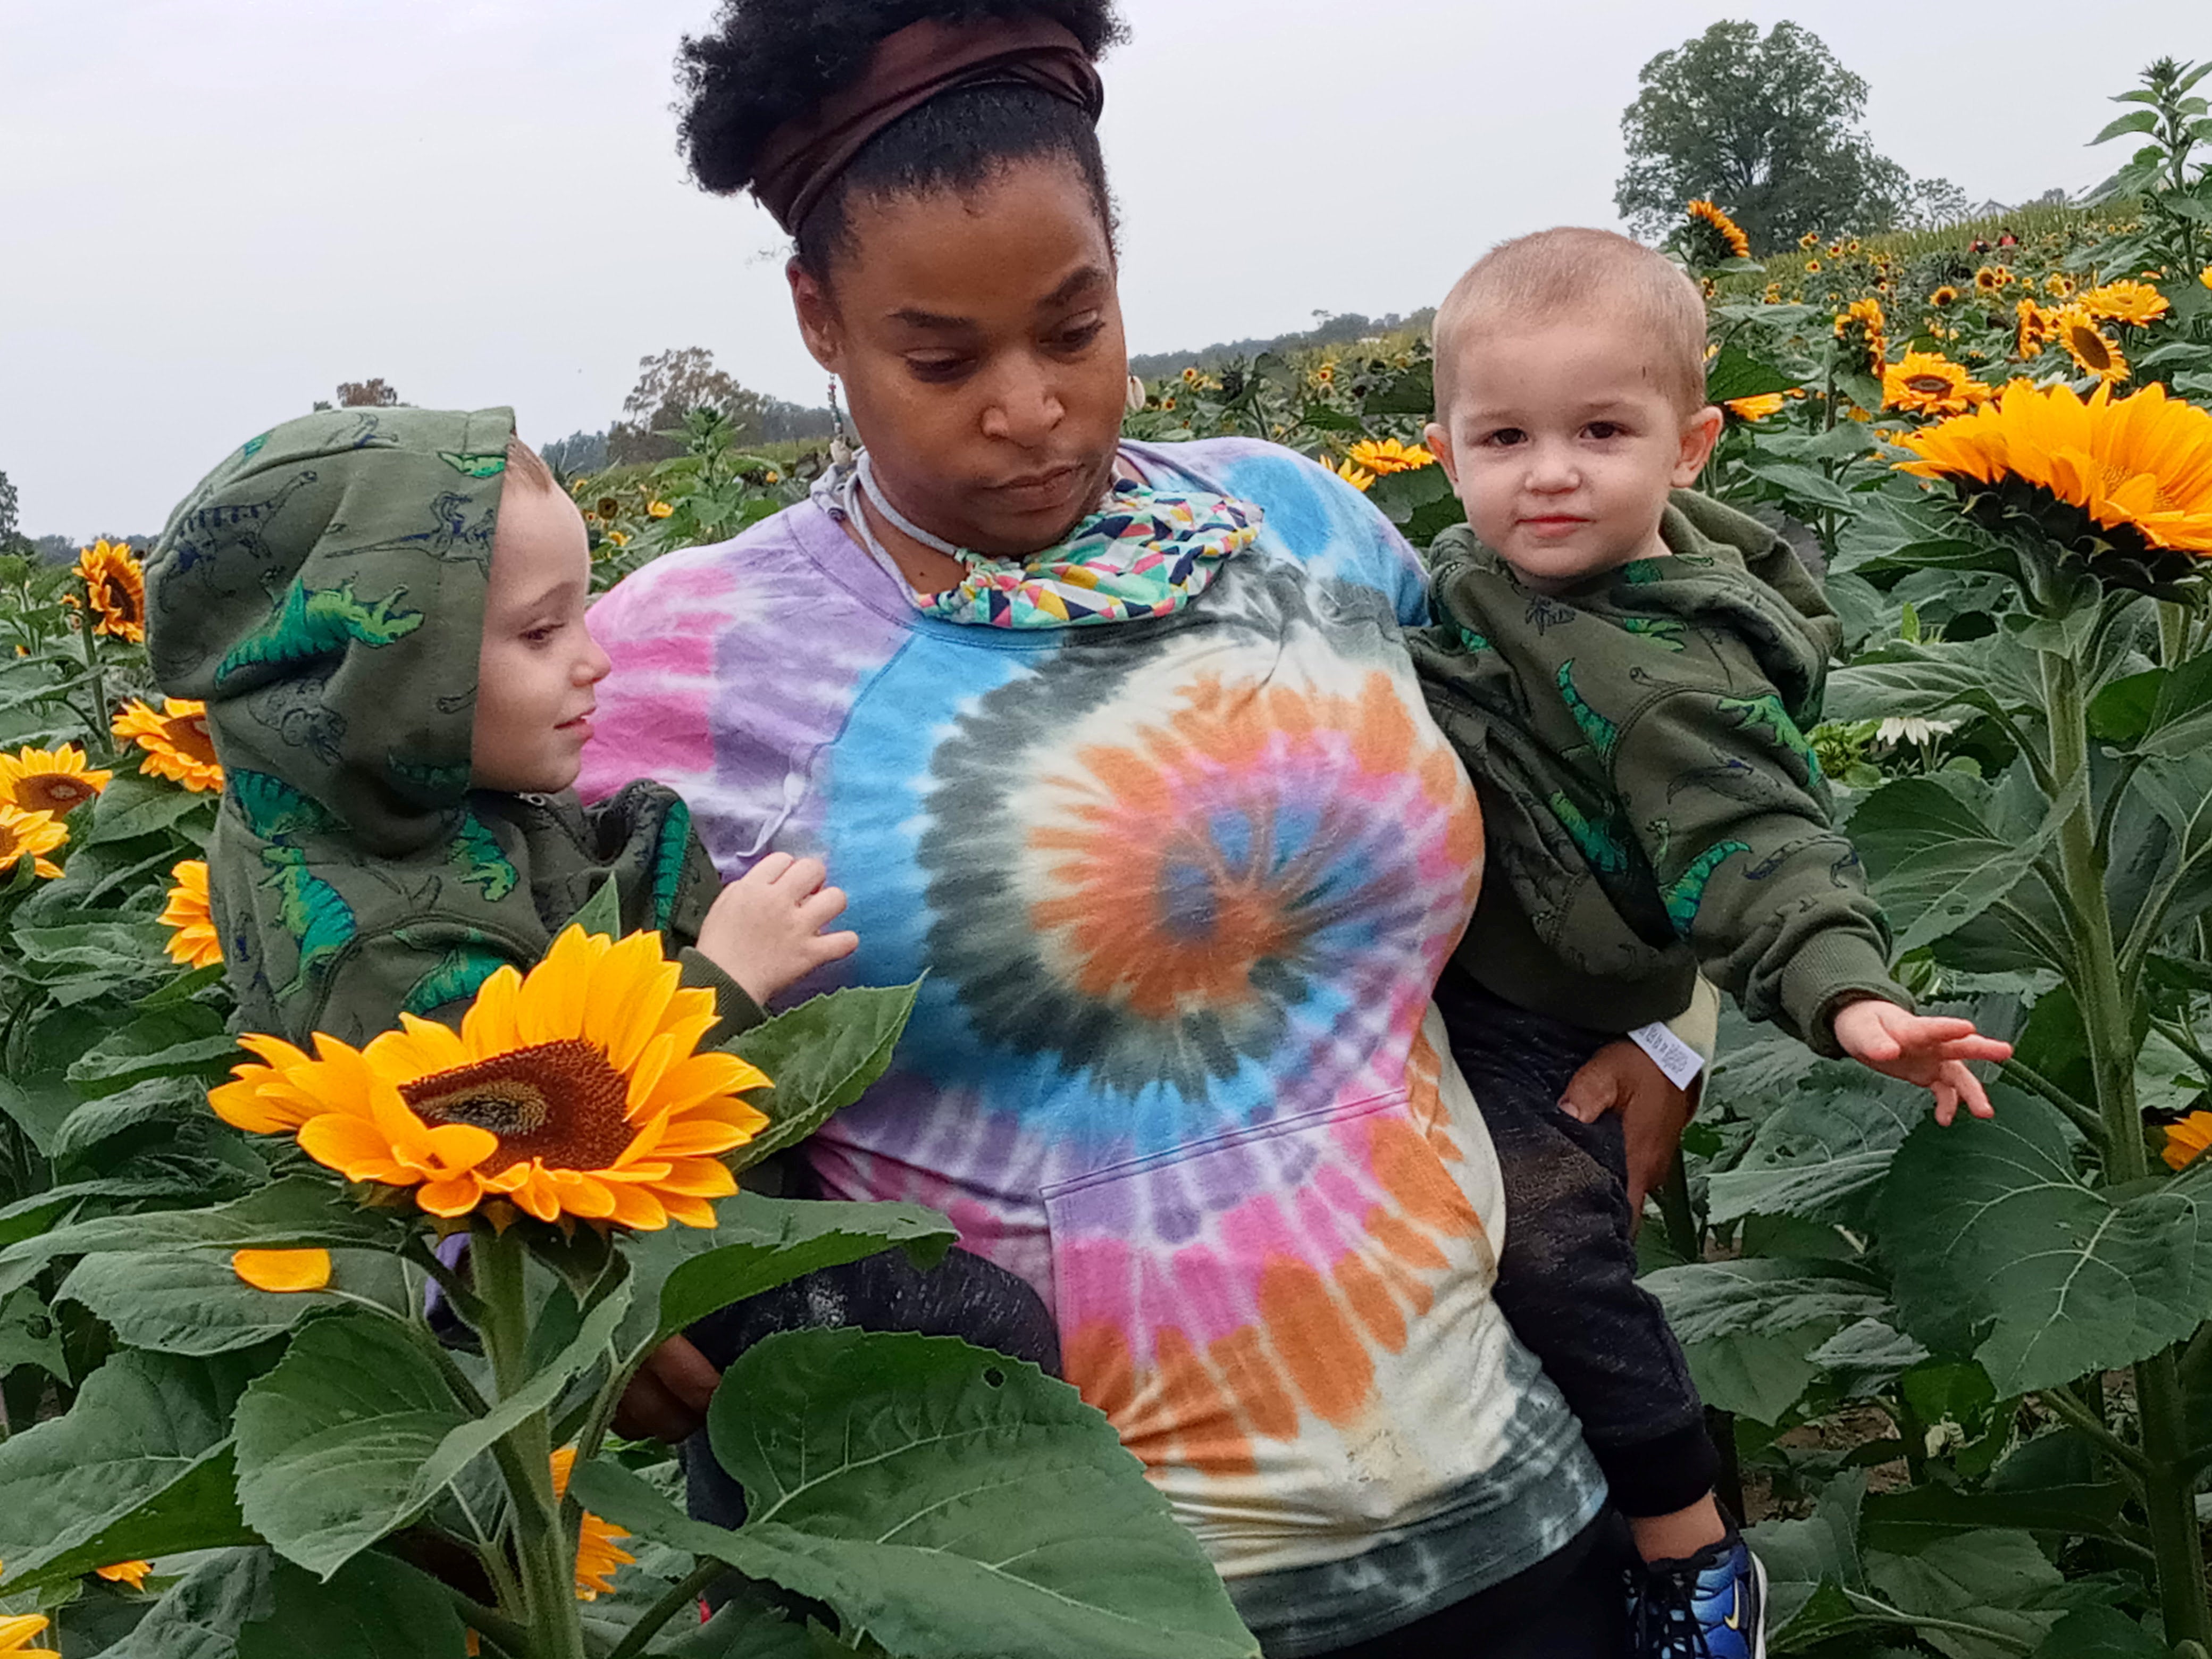 Black couple details experiences with racism after adopting white children